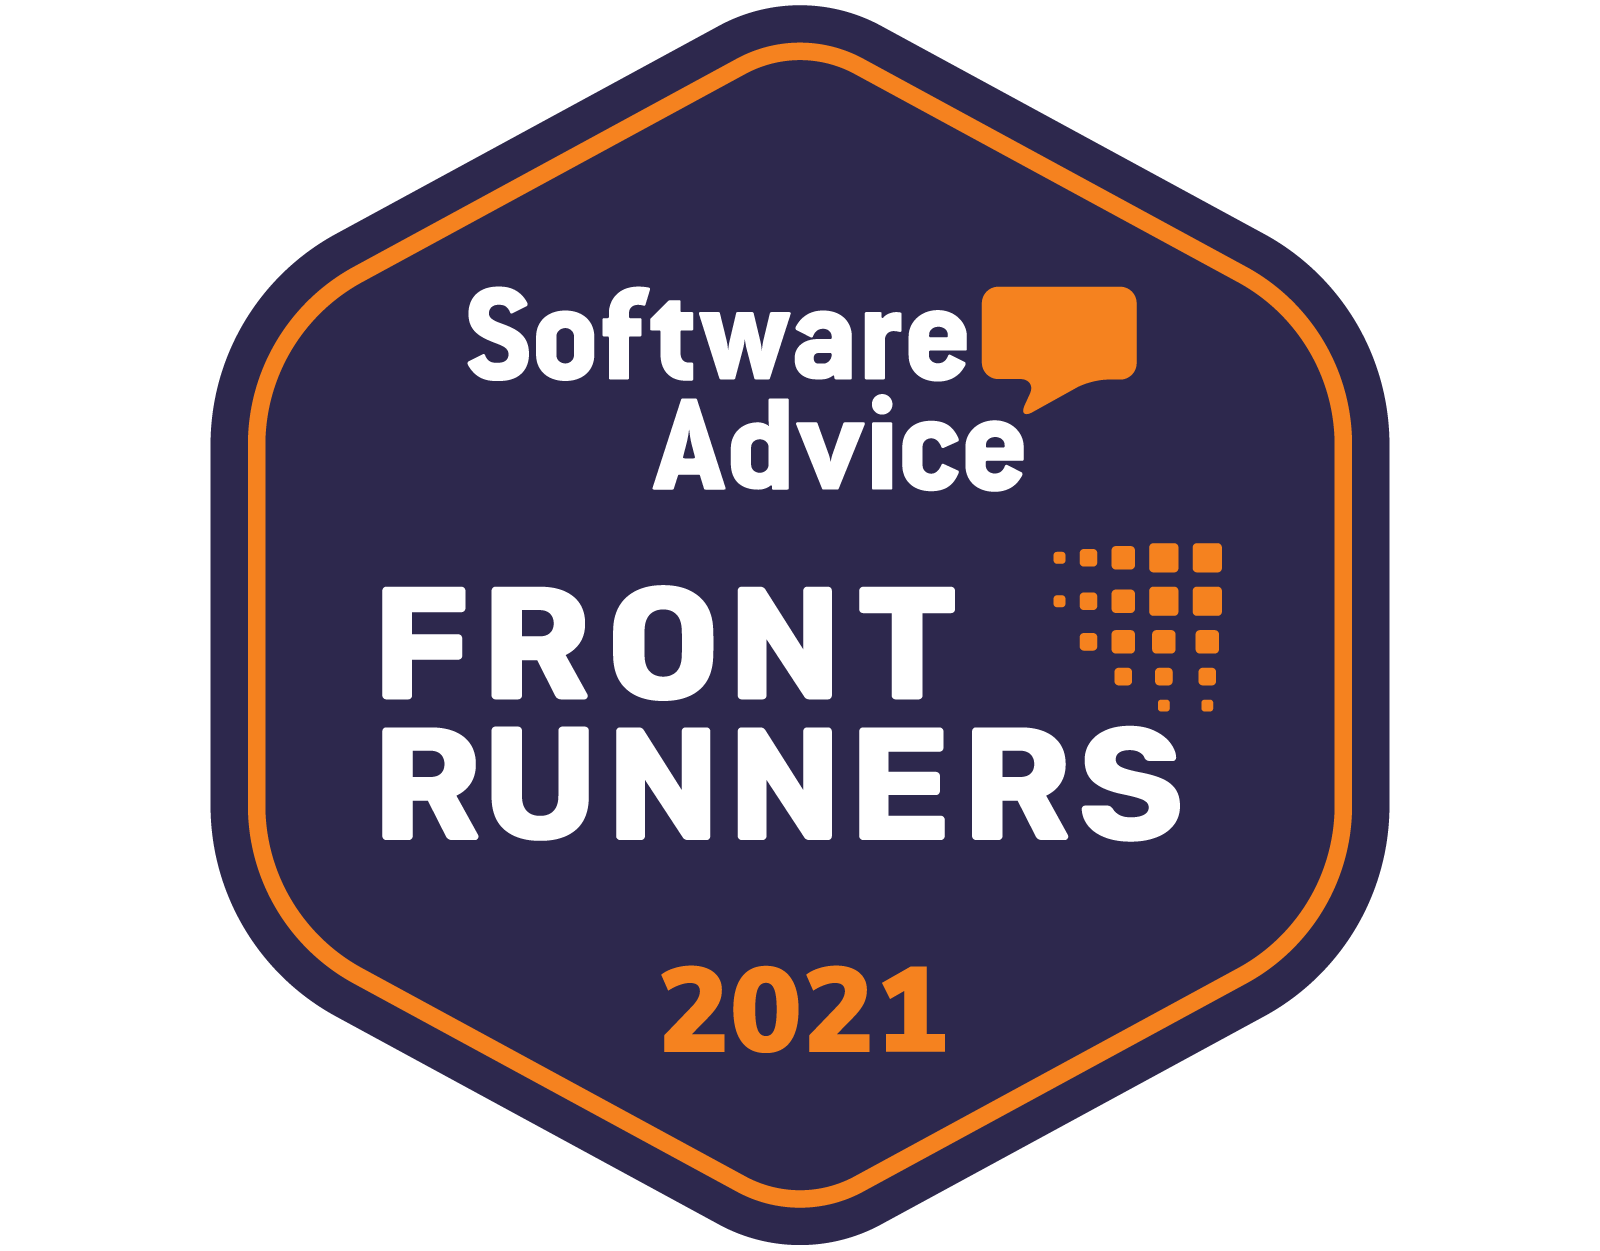 Praxis EMR - The Top Rated EHR - Software Advice FrontRunners 2021 User Reviews - Top Electronic Medical Records Software